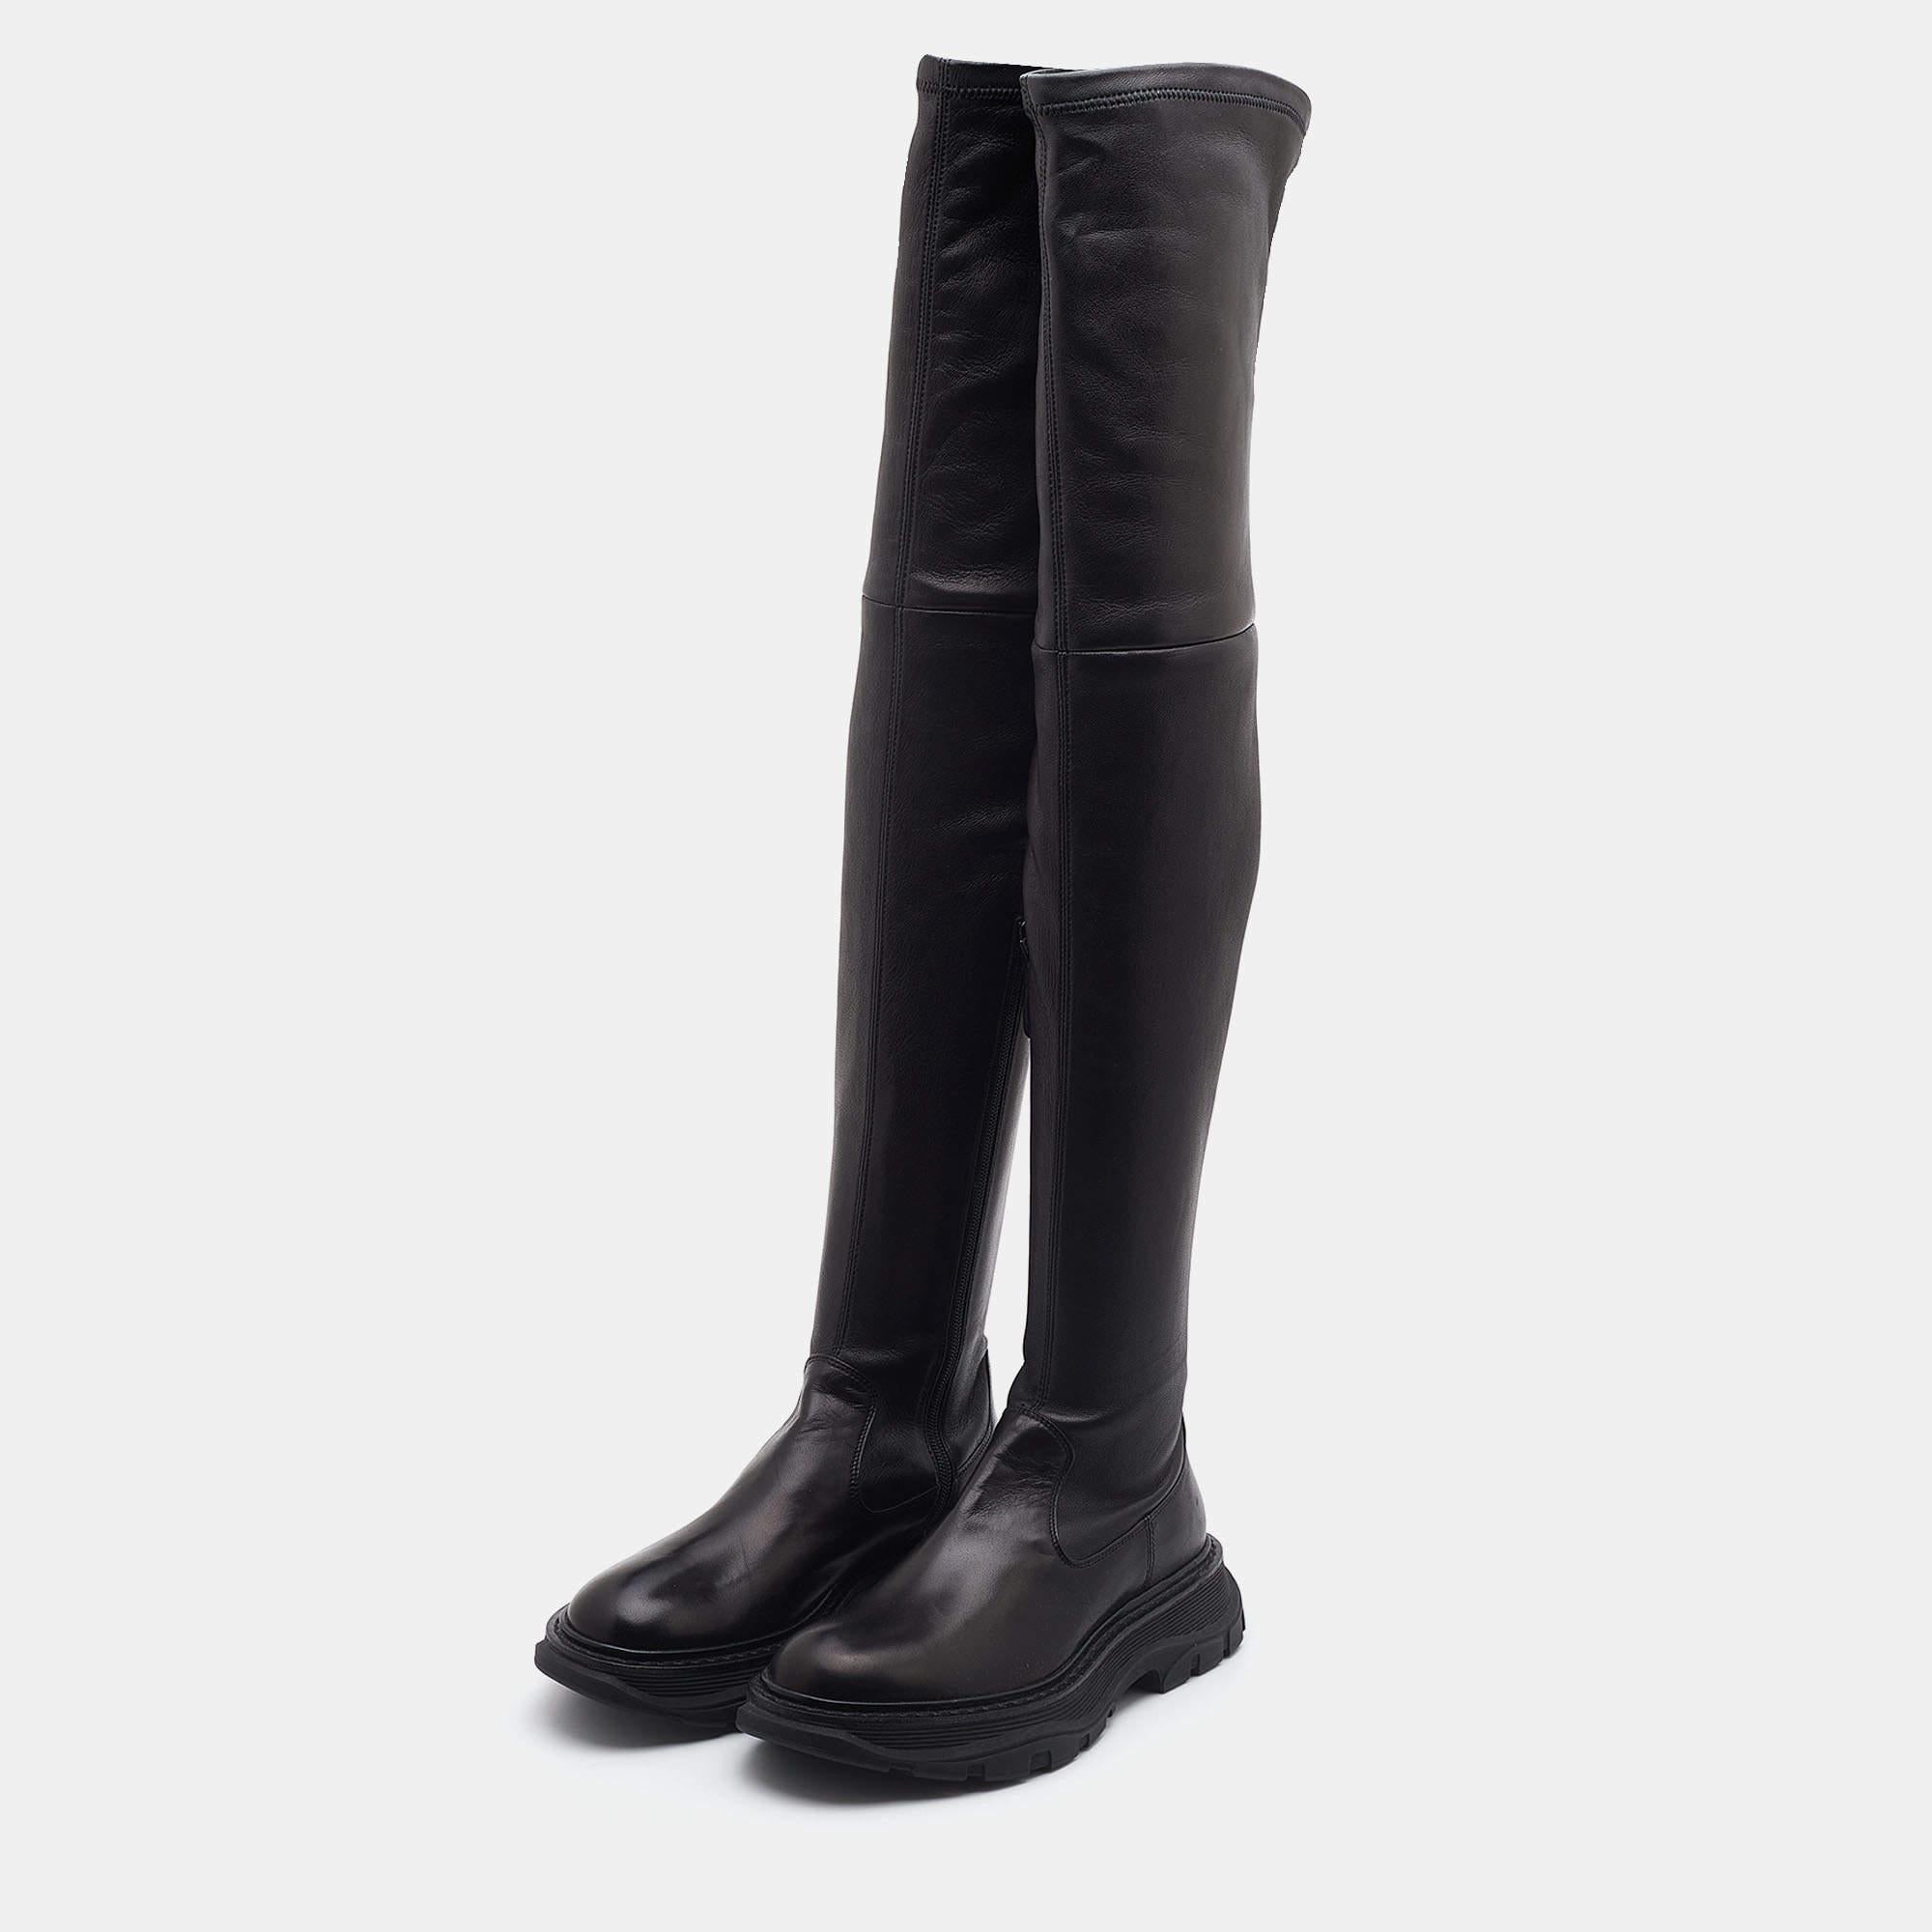 Women's Alexander McQueen Black Leather Over The Knee Boots Size 38.5